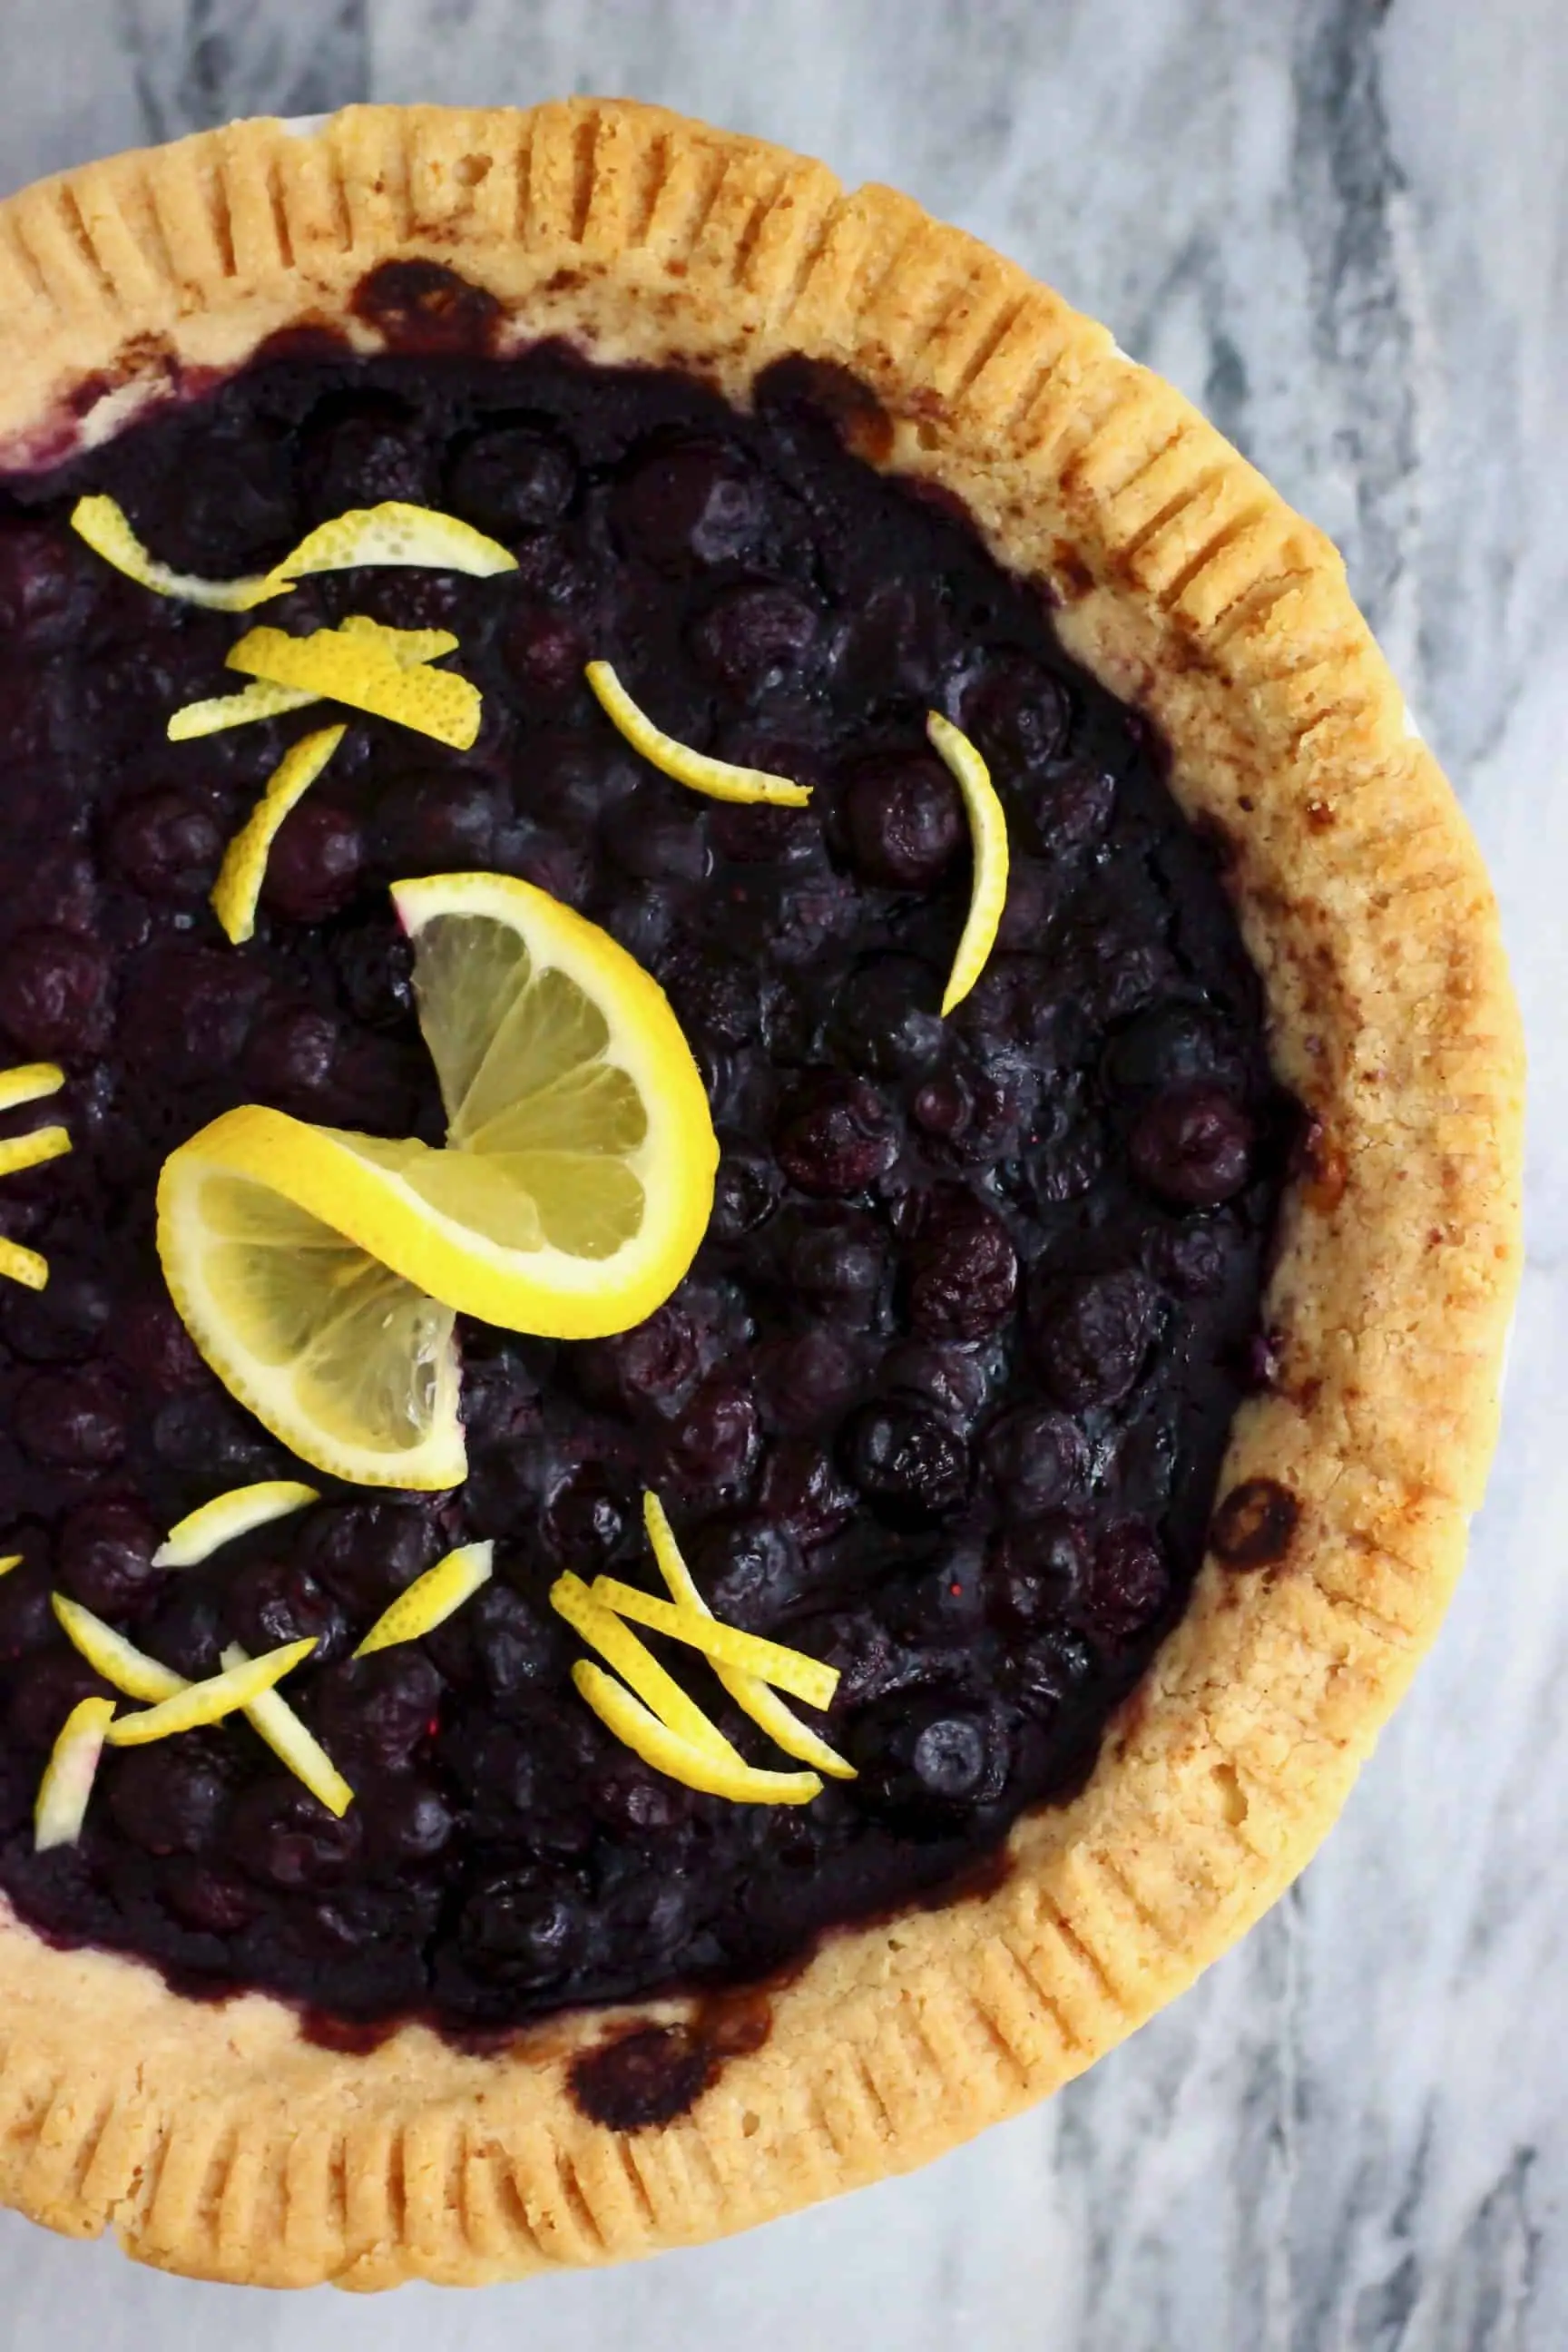 A blueberry pie decorated with lemon peel and a slice of lemon against a marble background